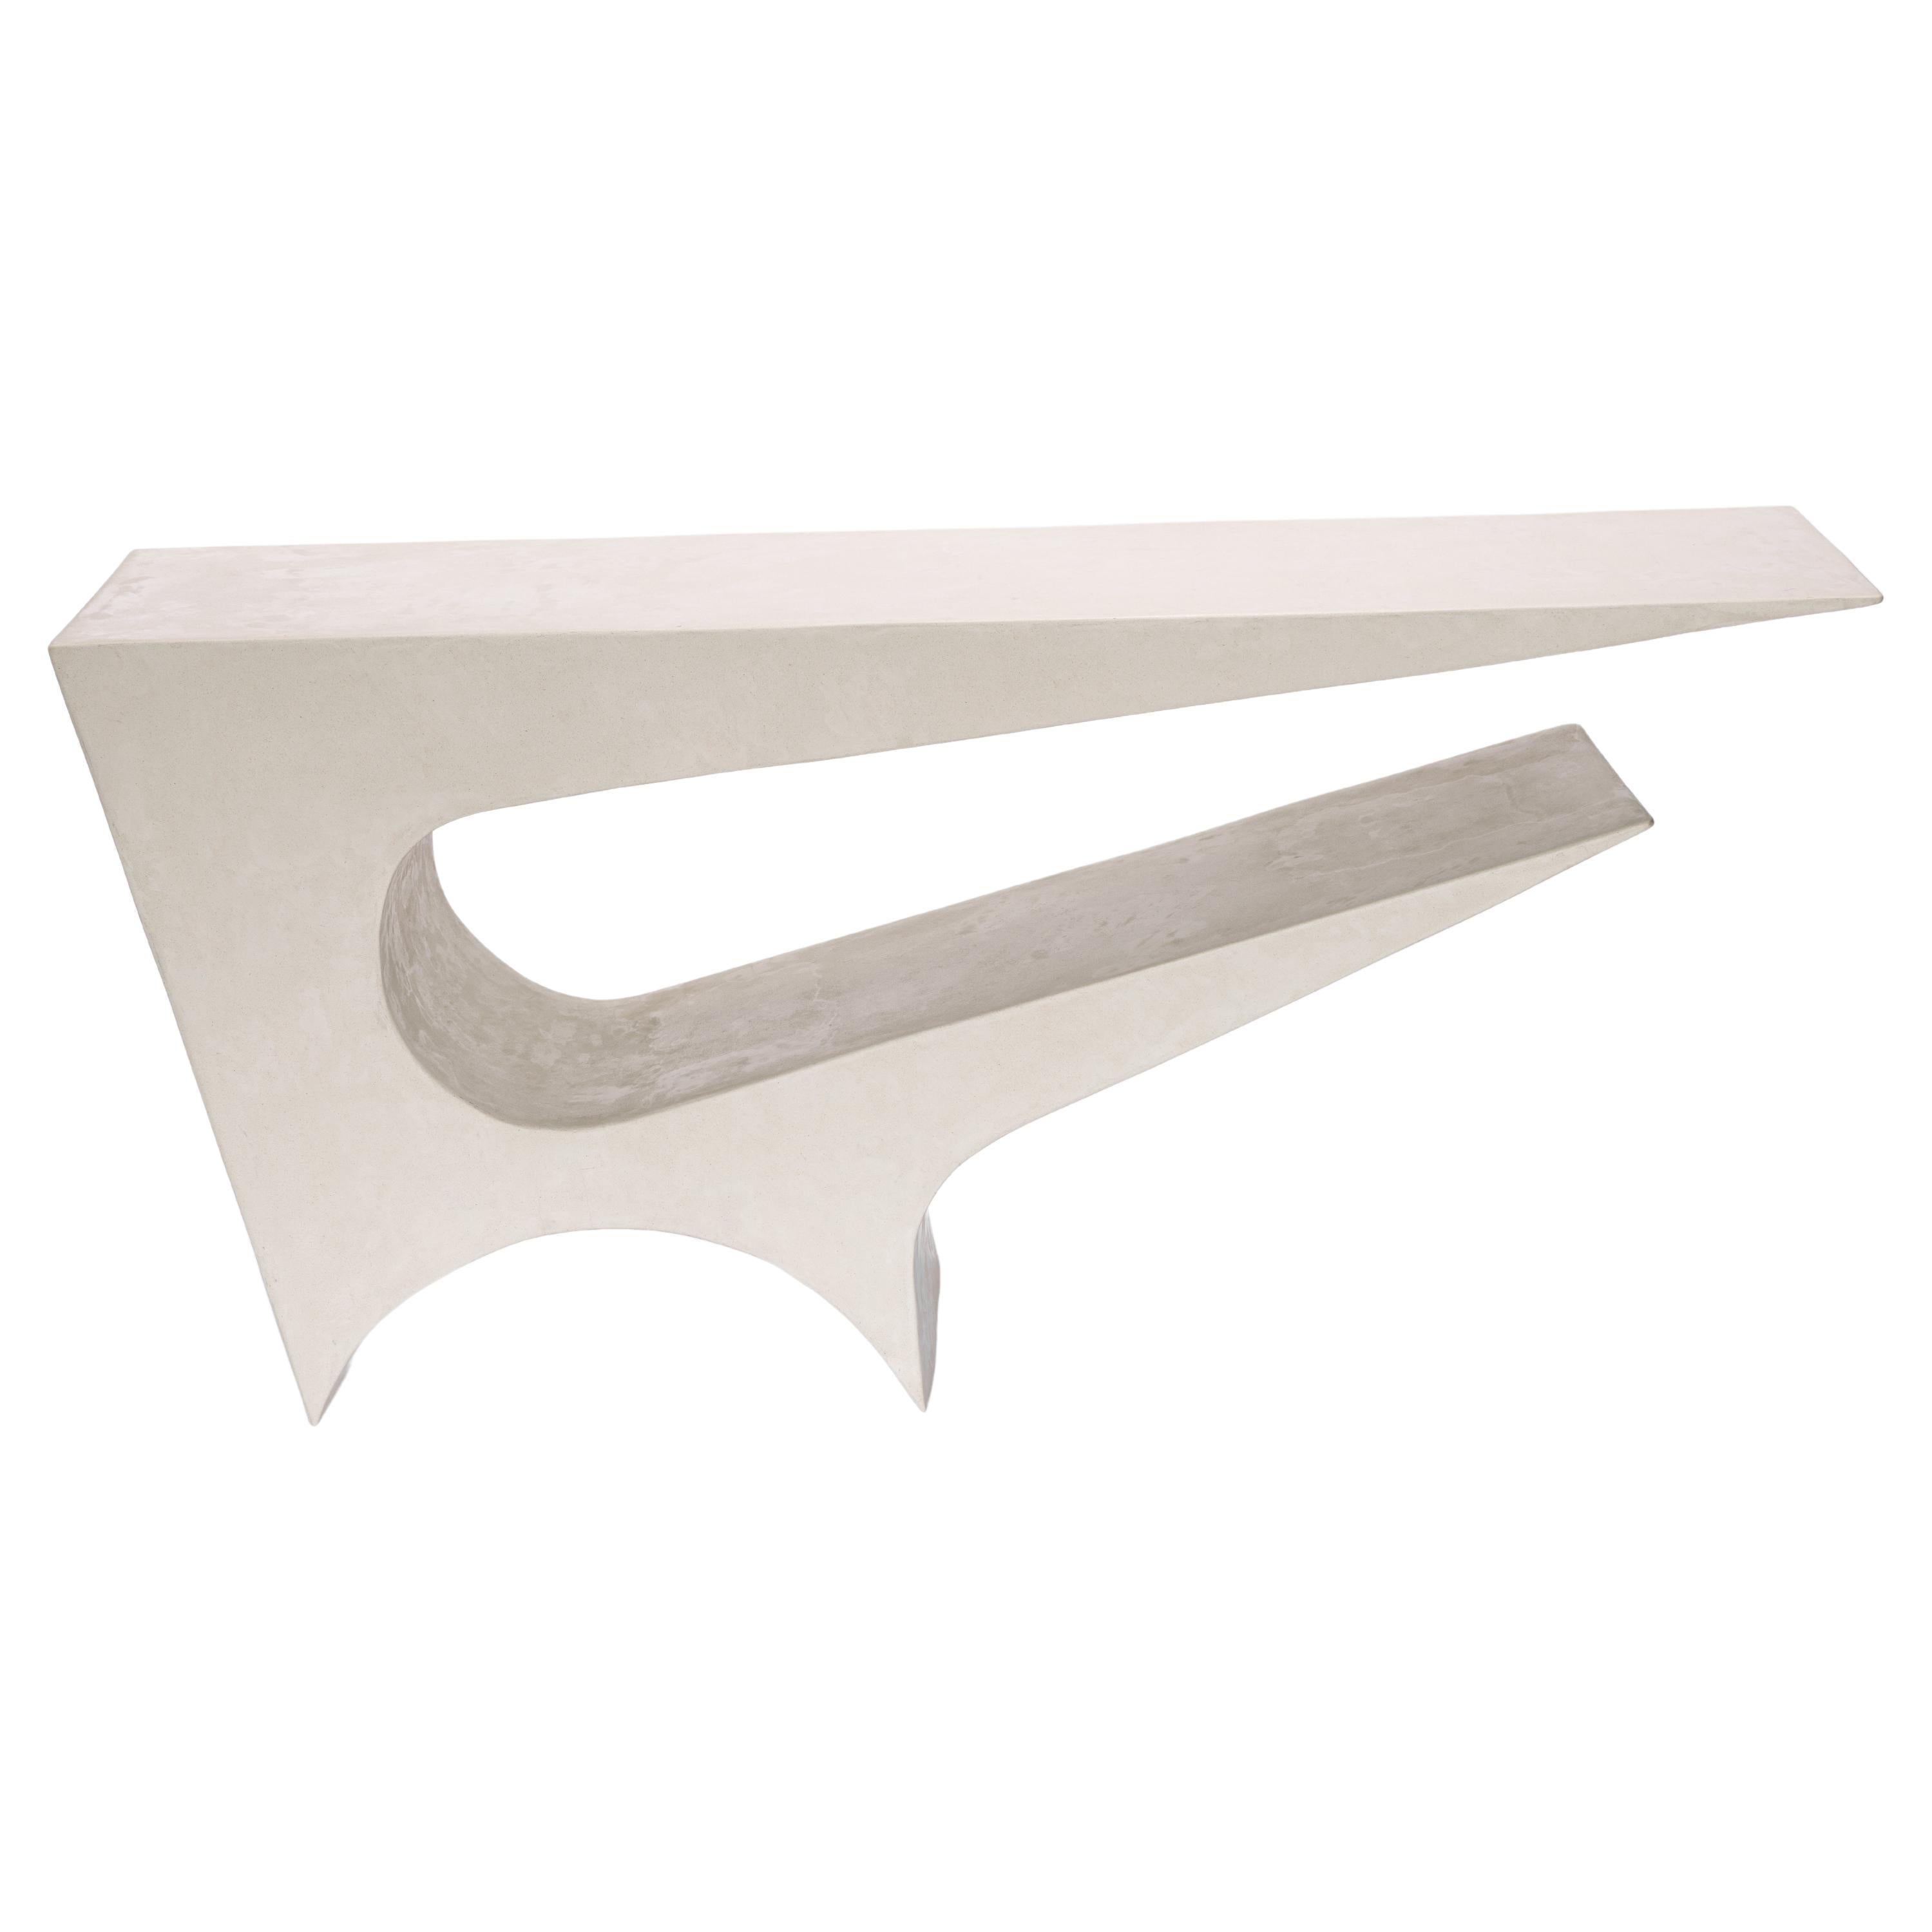 Star Axis Console in Polished Concrete by Neal Aronowitz Design For Sale